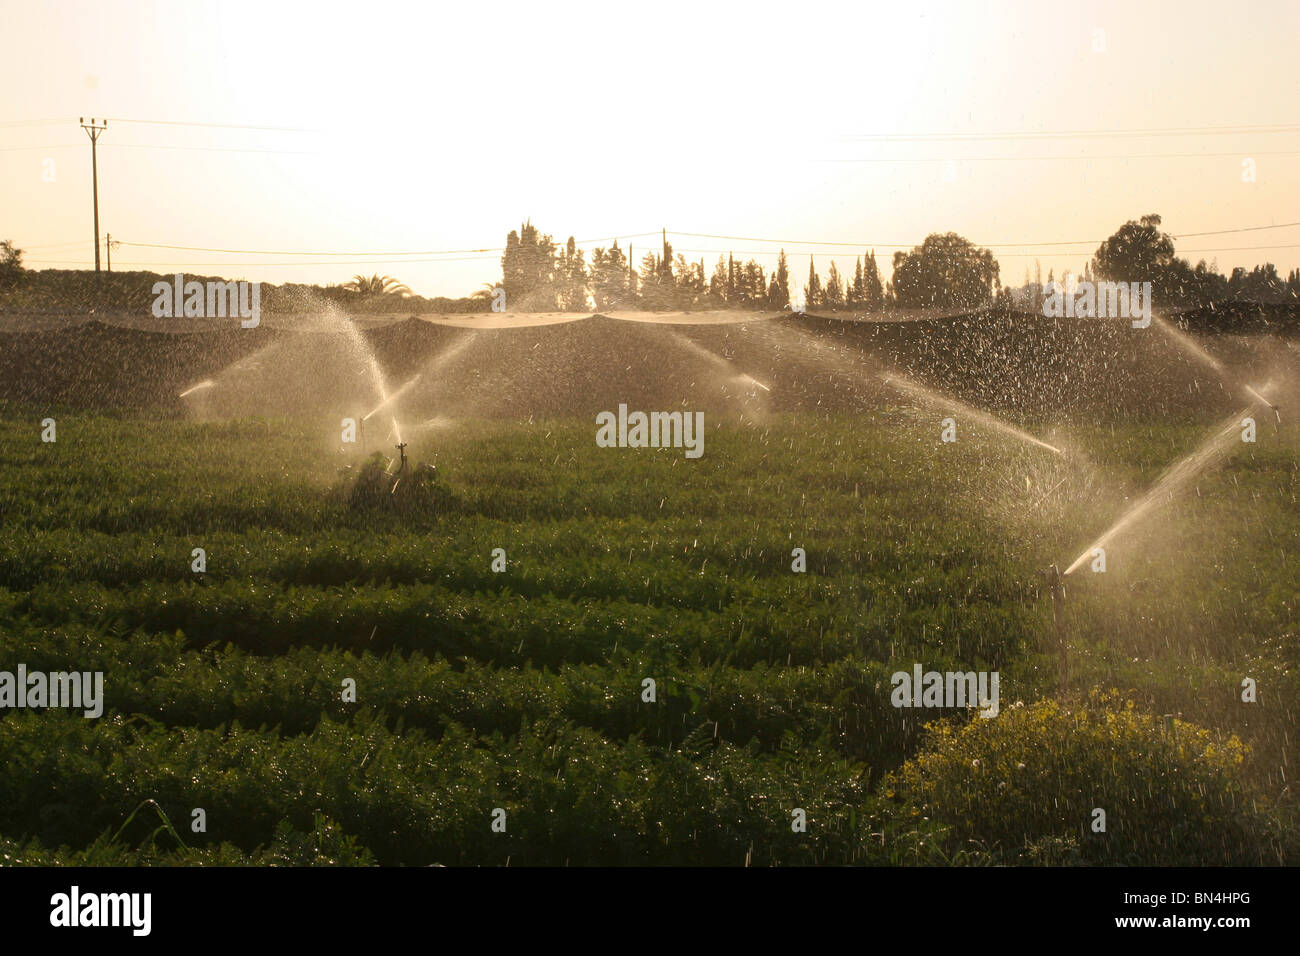 Water sprinkles are turned on a field of carrots during sunset. Stock Photo